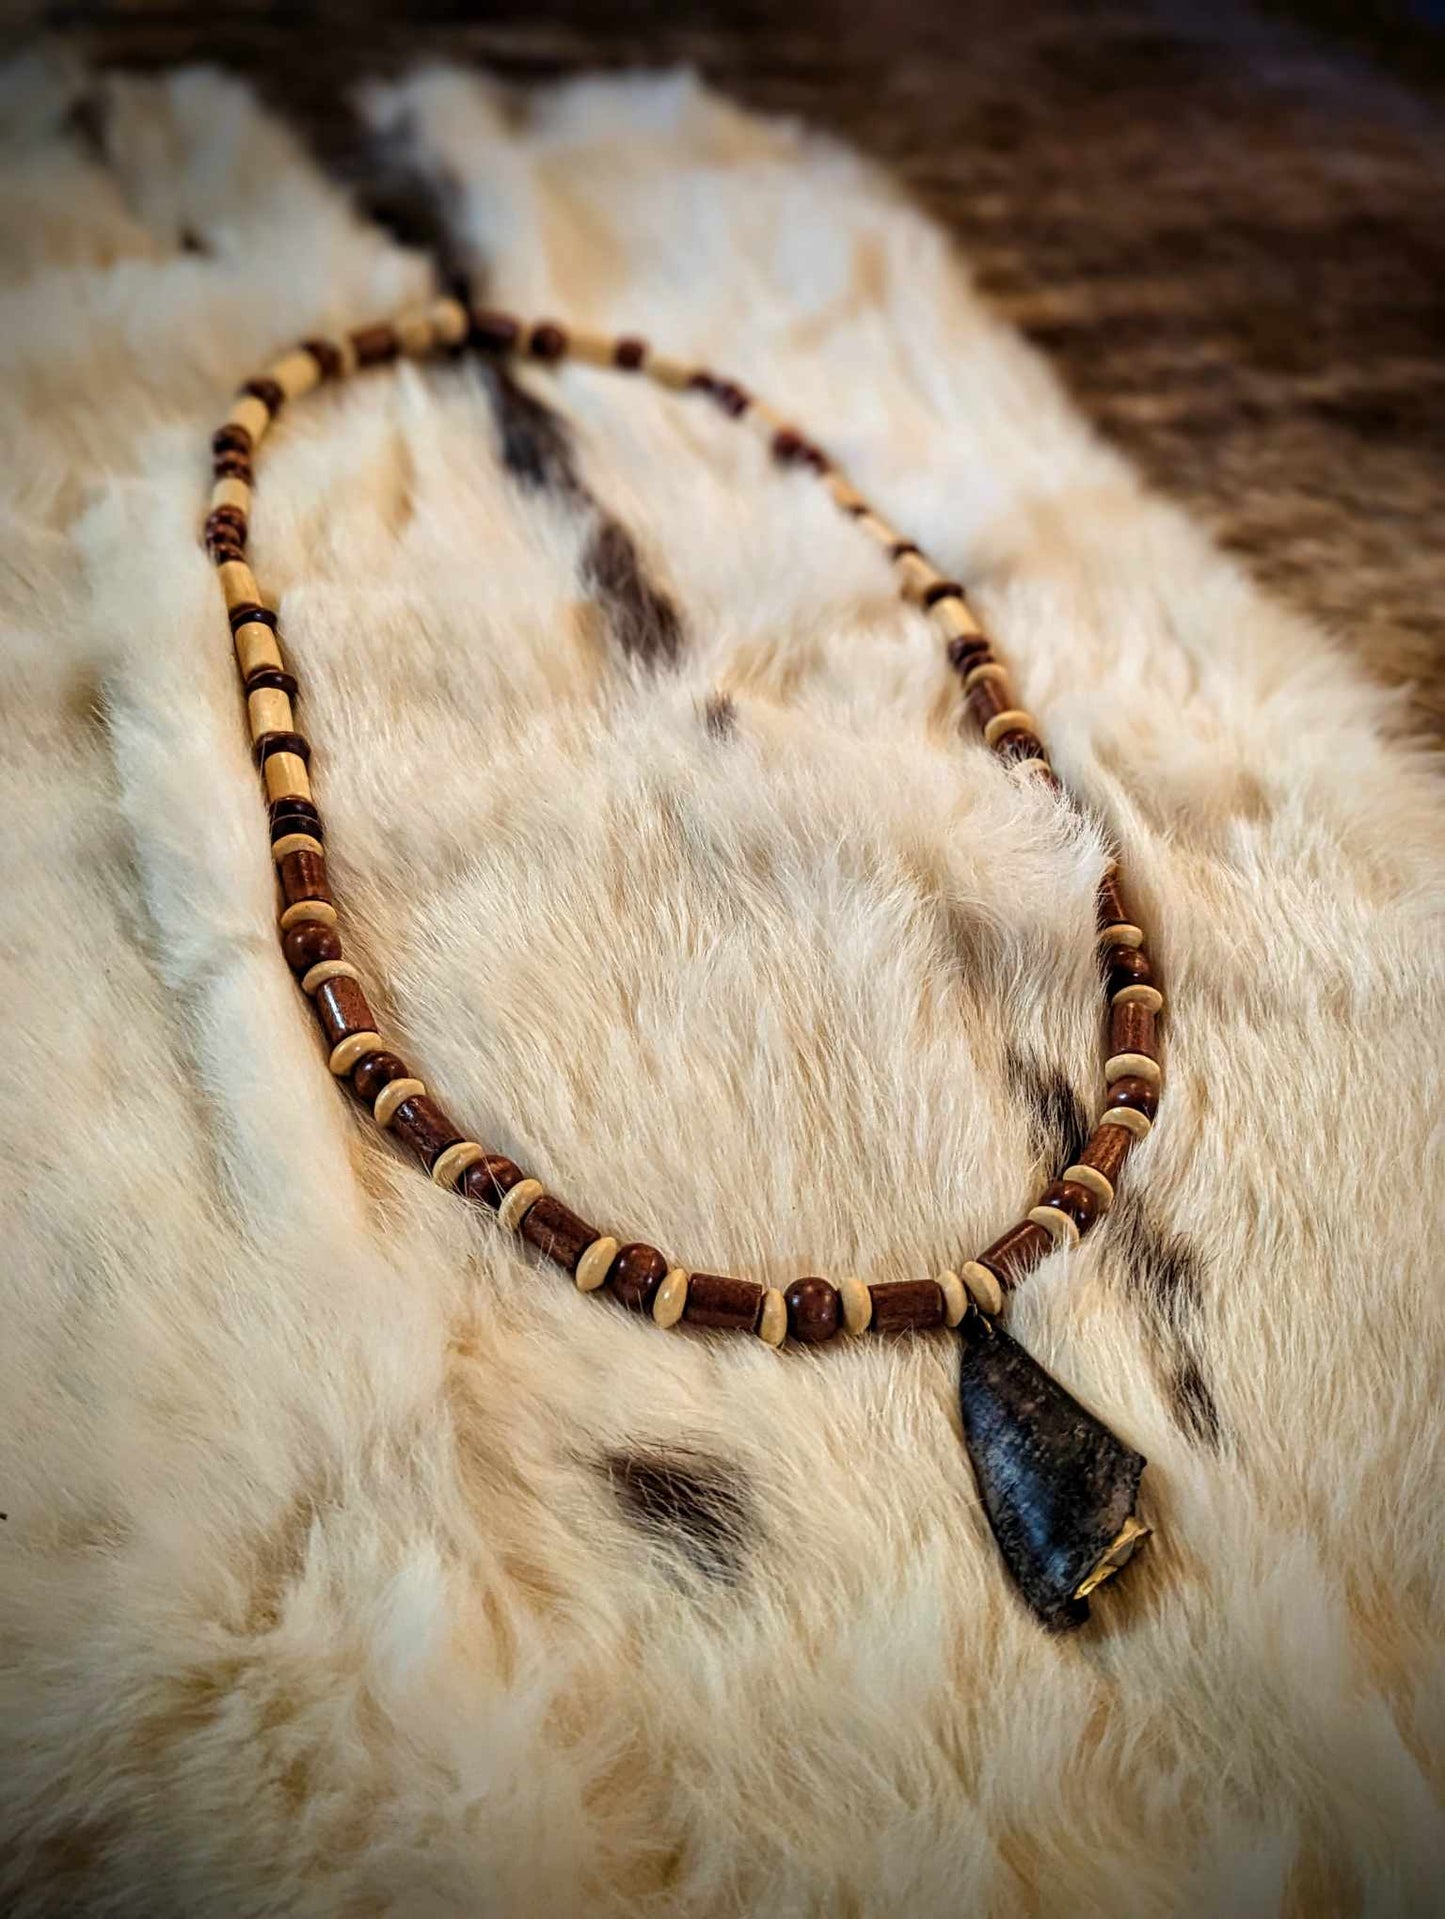 Deer Hoof and Bell Amulet with Wood Beads